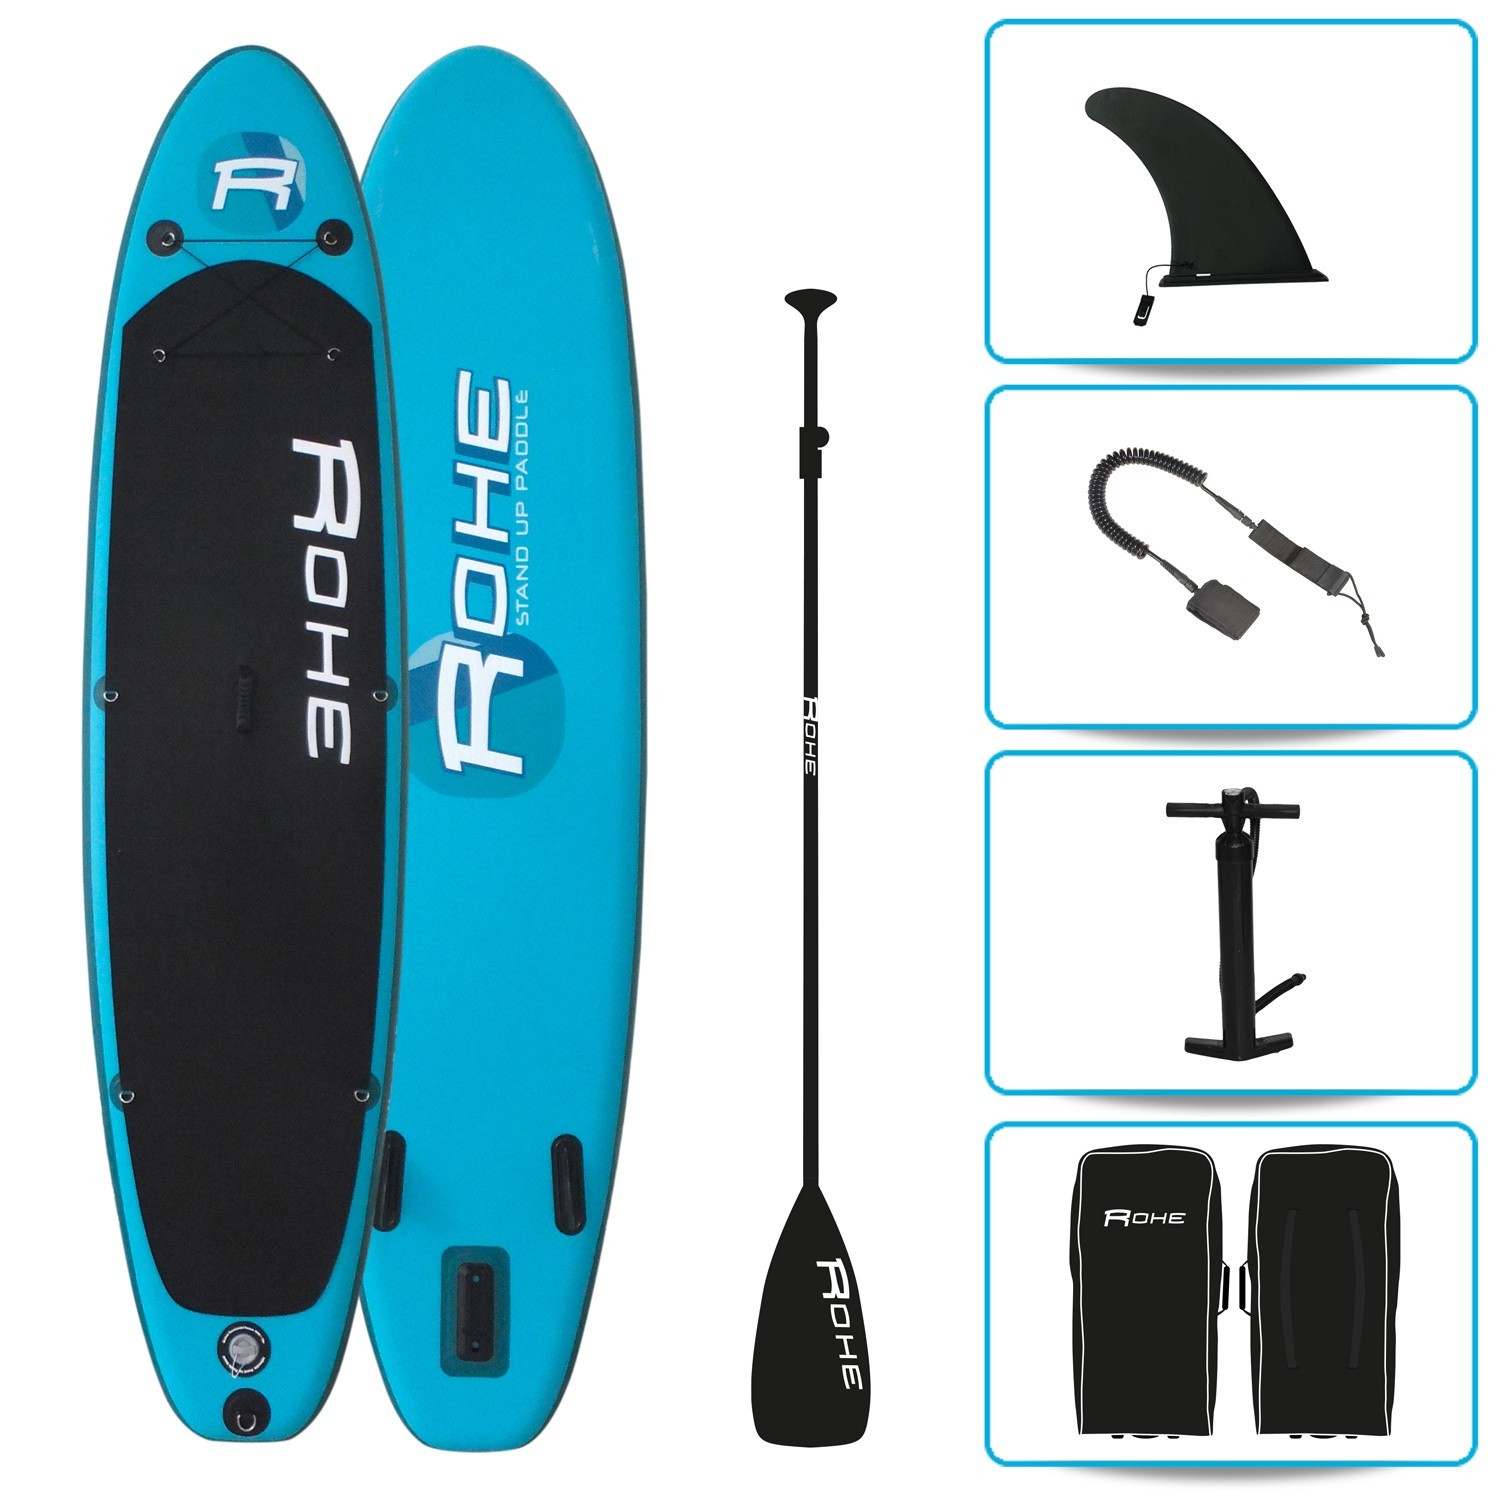 Paddle Hinchable Pacific 10'6' + Accesorios 320 X 76 X 15 Cm - Paddle Surf  MKP